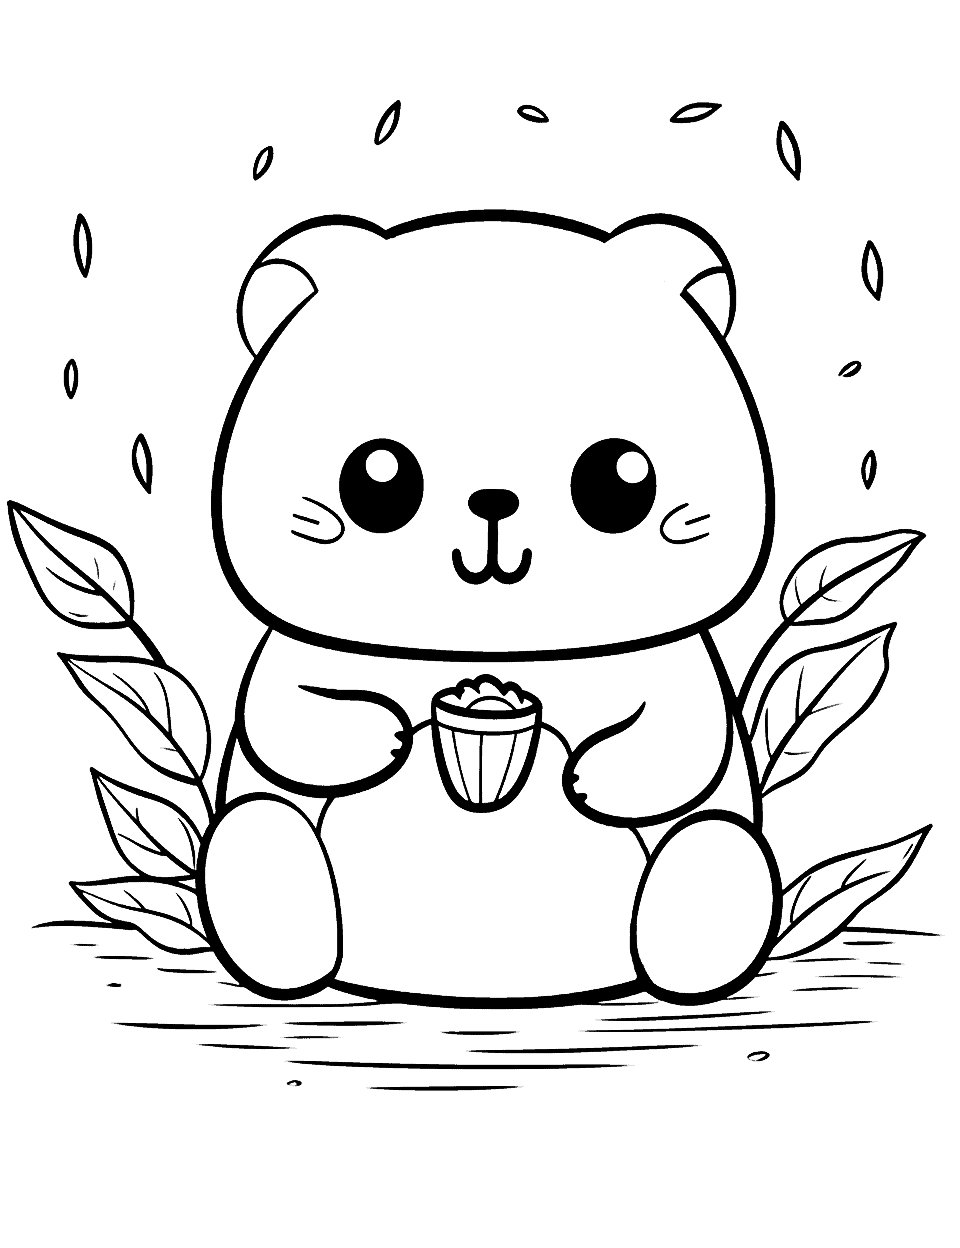 Coloring Set 2 - Cute Kawaii Coloring Pages For Kids And Adults